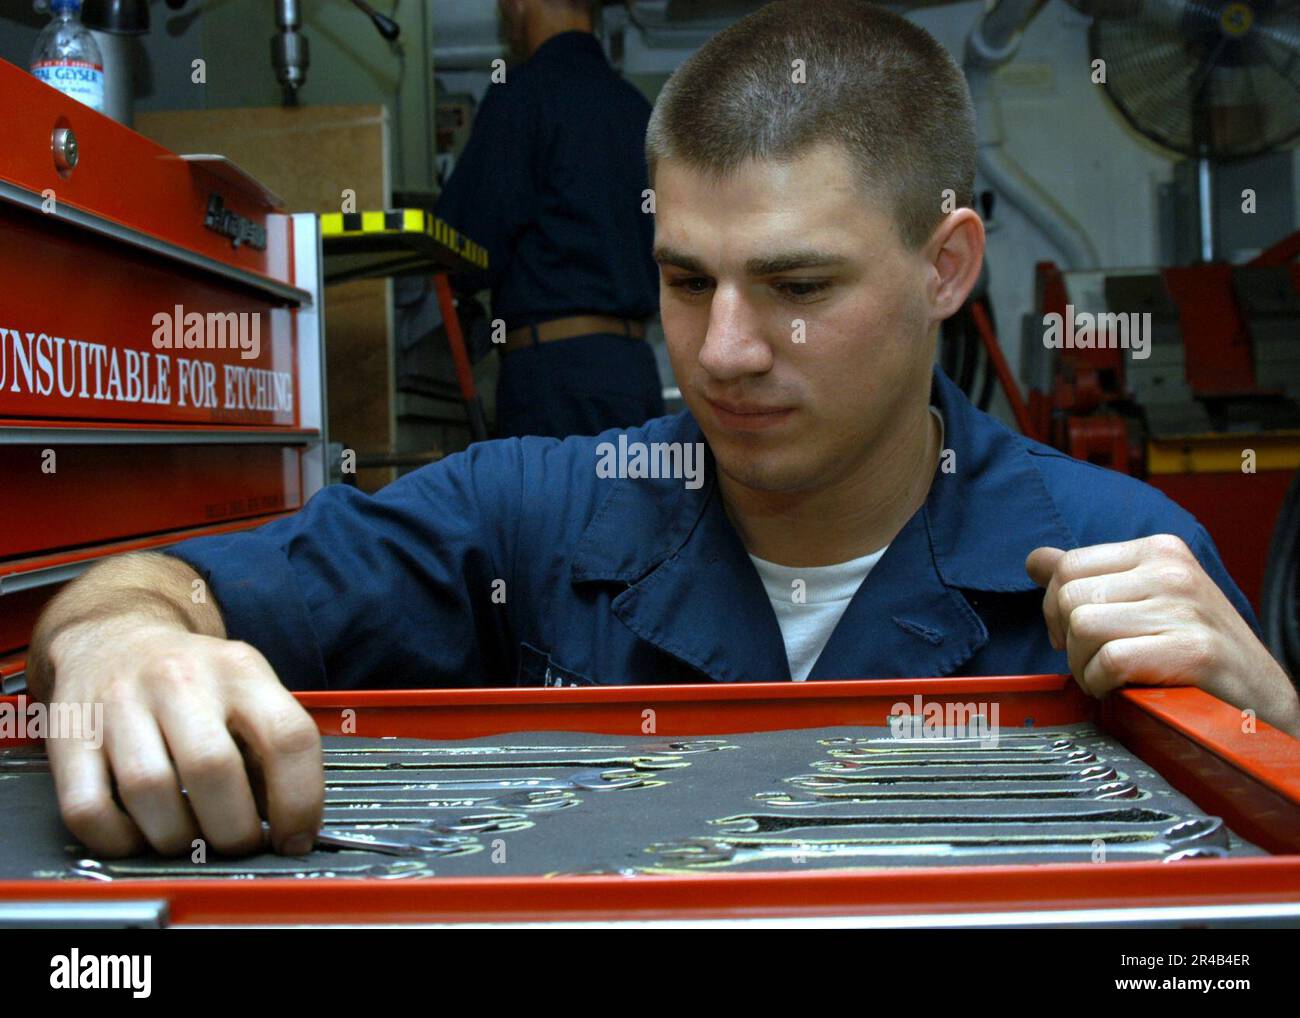 US Navy Aviation Structural Mechanic Airman counts tools during ...